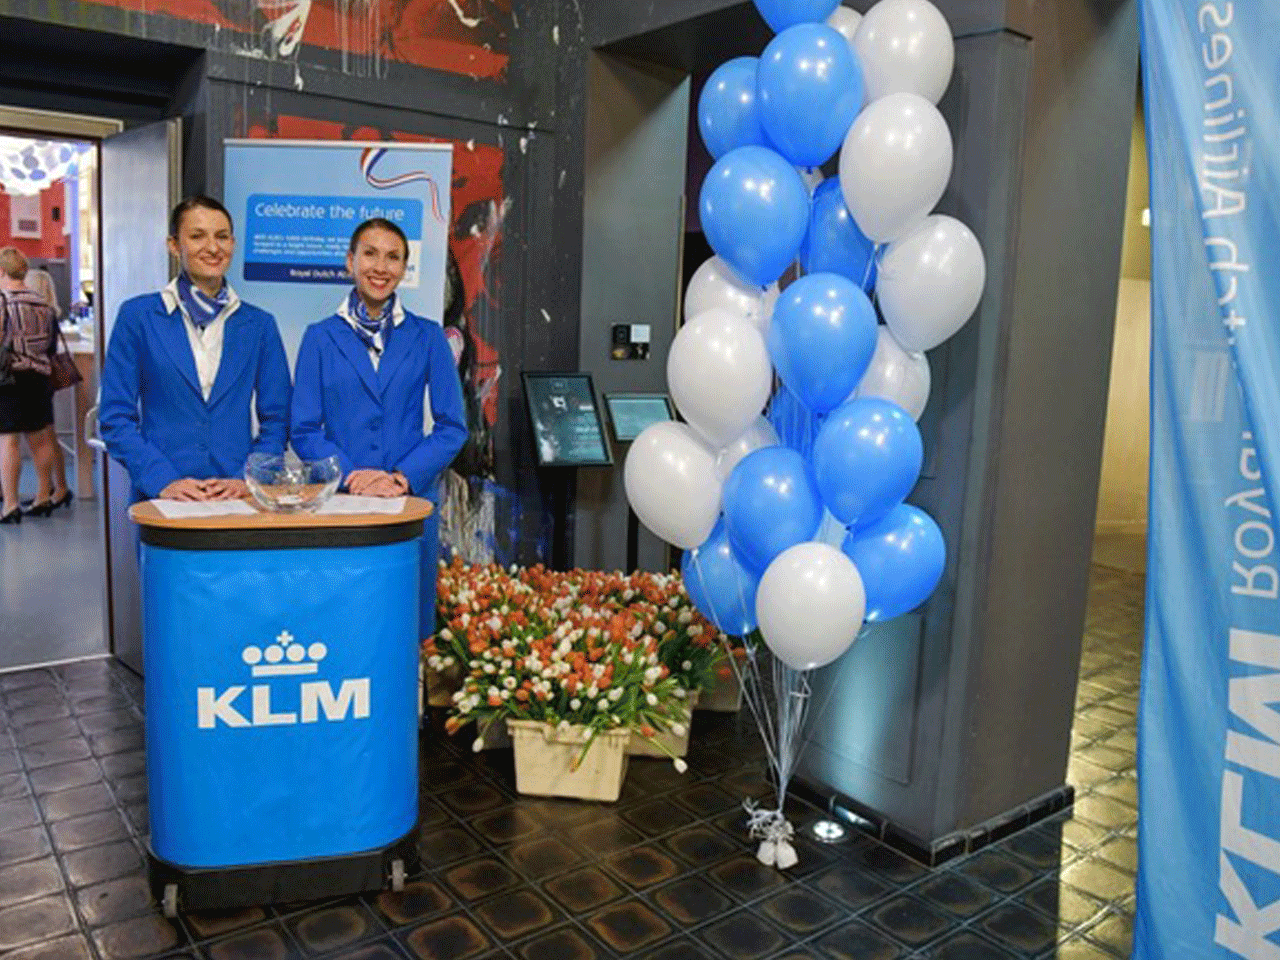 We have organized event for 100 years of KLM ROYAL DUTCH AIRLINES